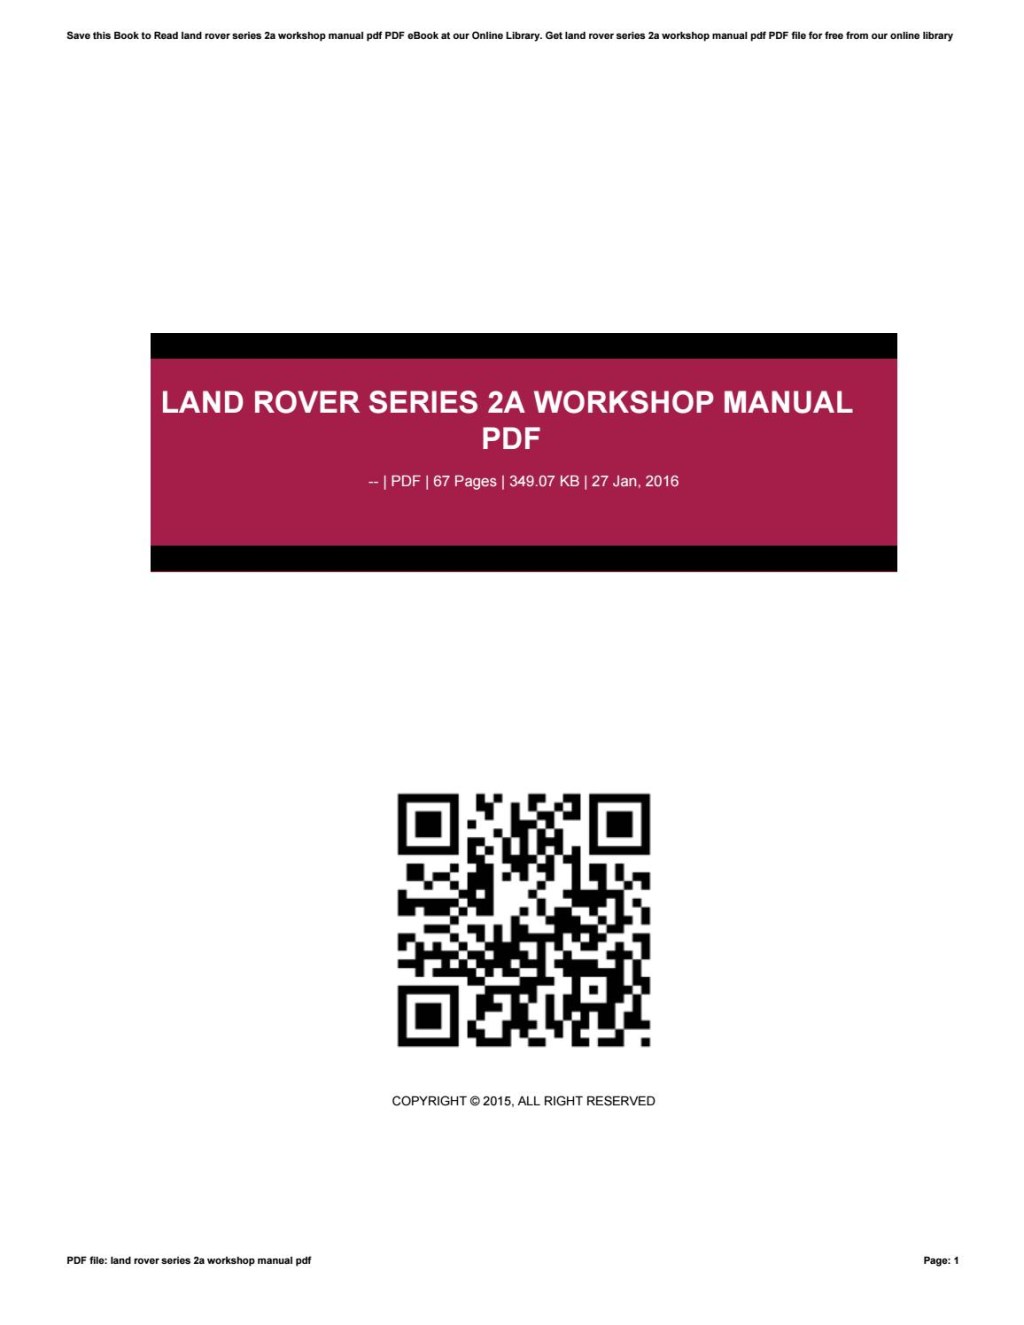 Picture of: Land rover series a workshop manual pdf by daris3darmawan – Issuu